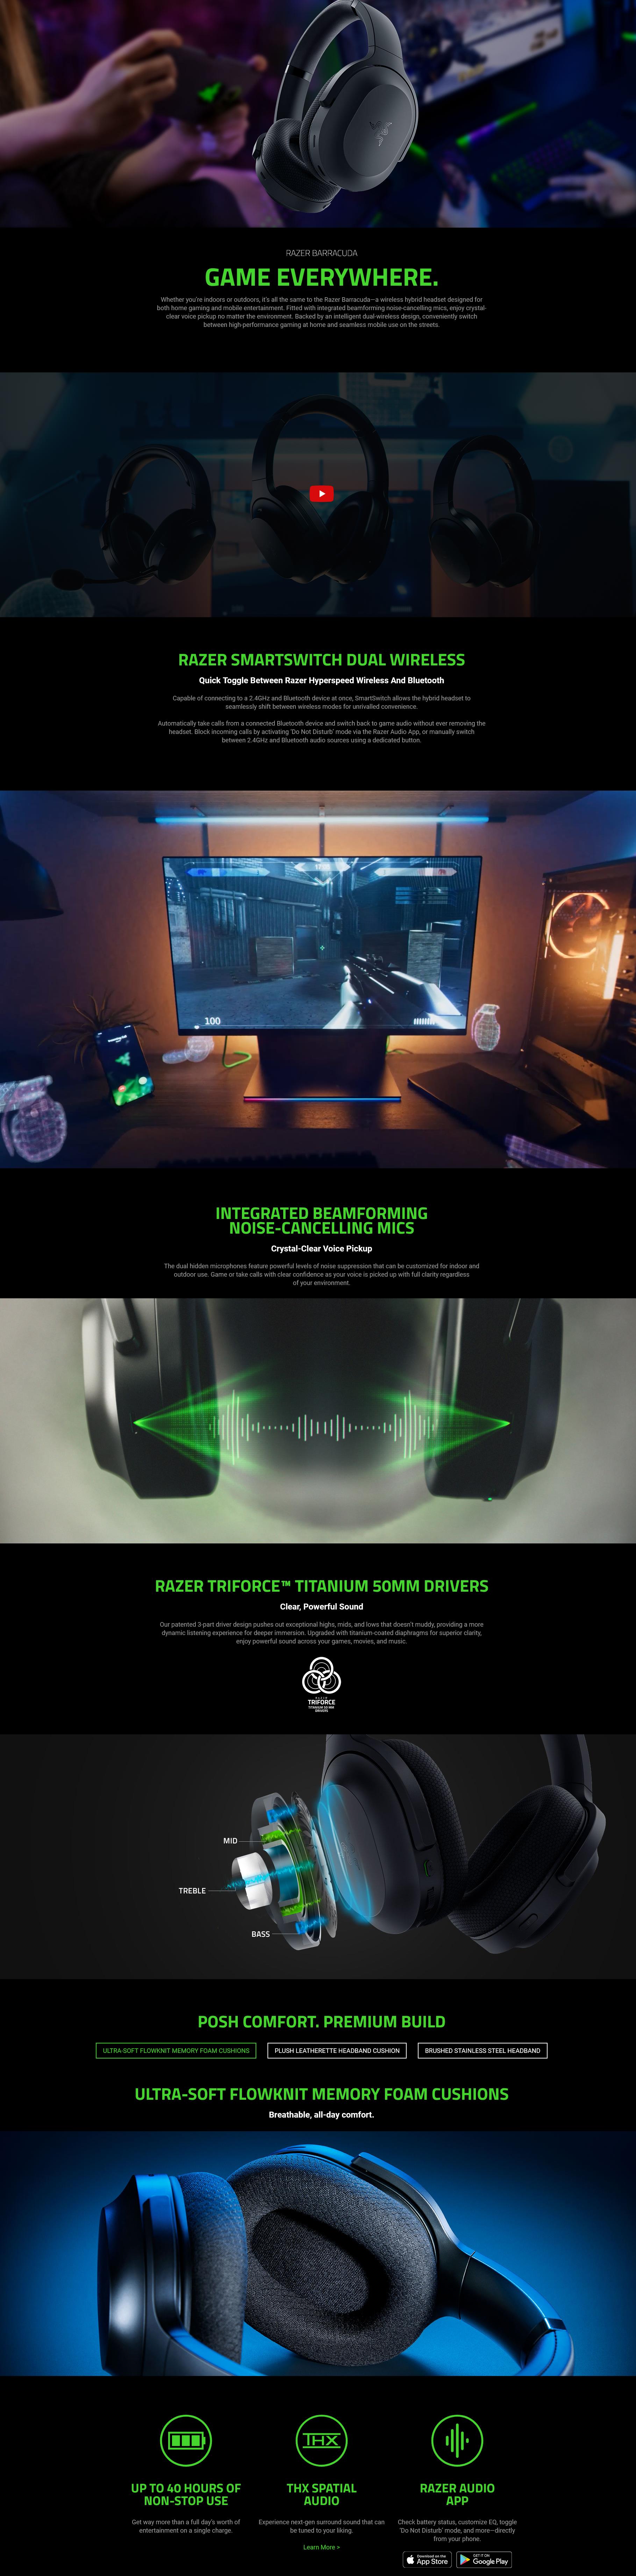 A large marketing image providing additional information about the product Razer Barracuda - Wireless Multi-platform Gaming Headset (Black) - Additional alt info not provided